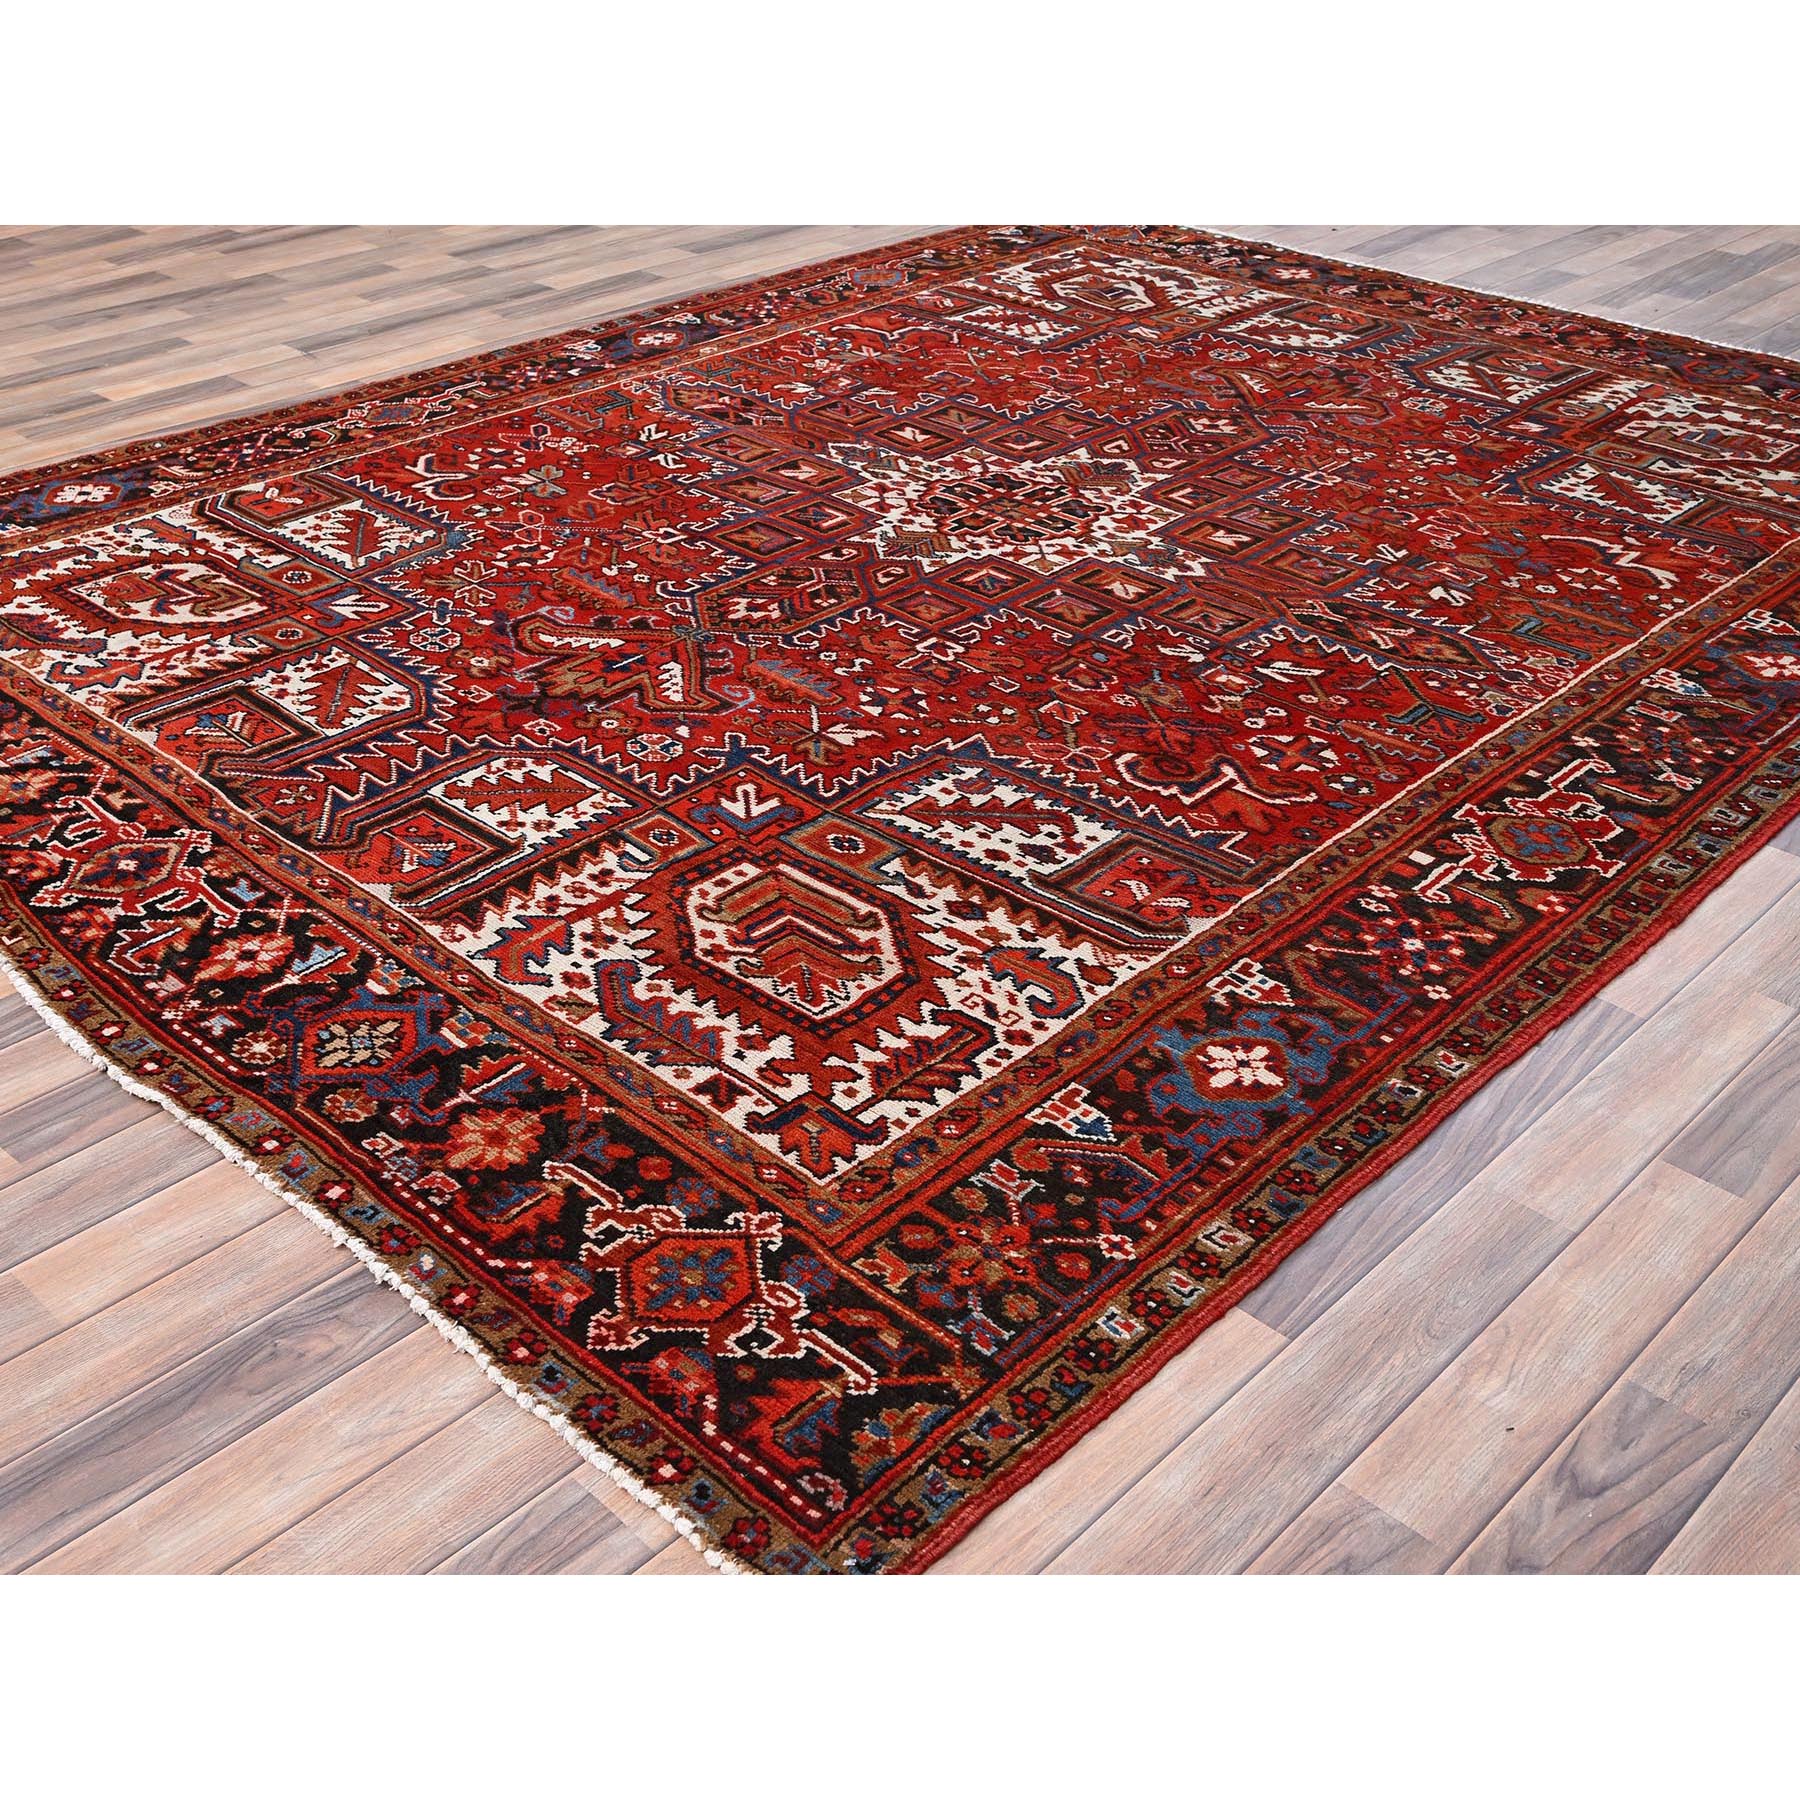 8'1"x10'5" Chili Red, Hand Woven, Vintage Persian Heriz with Tribal Ambience, Good Condition, Distressed Feel, Evenly Worn, Pure Wool, Oriental Rug 